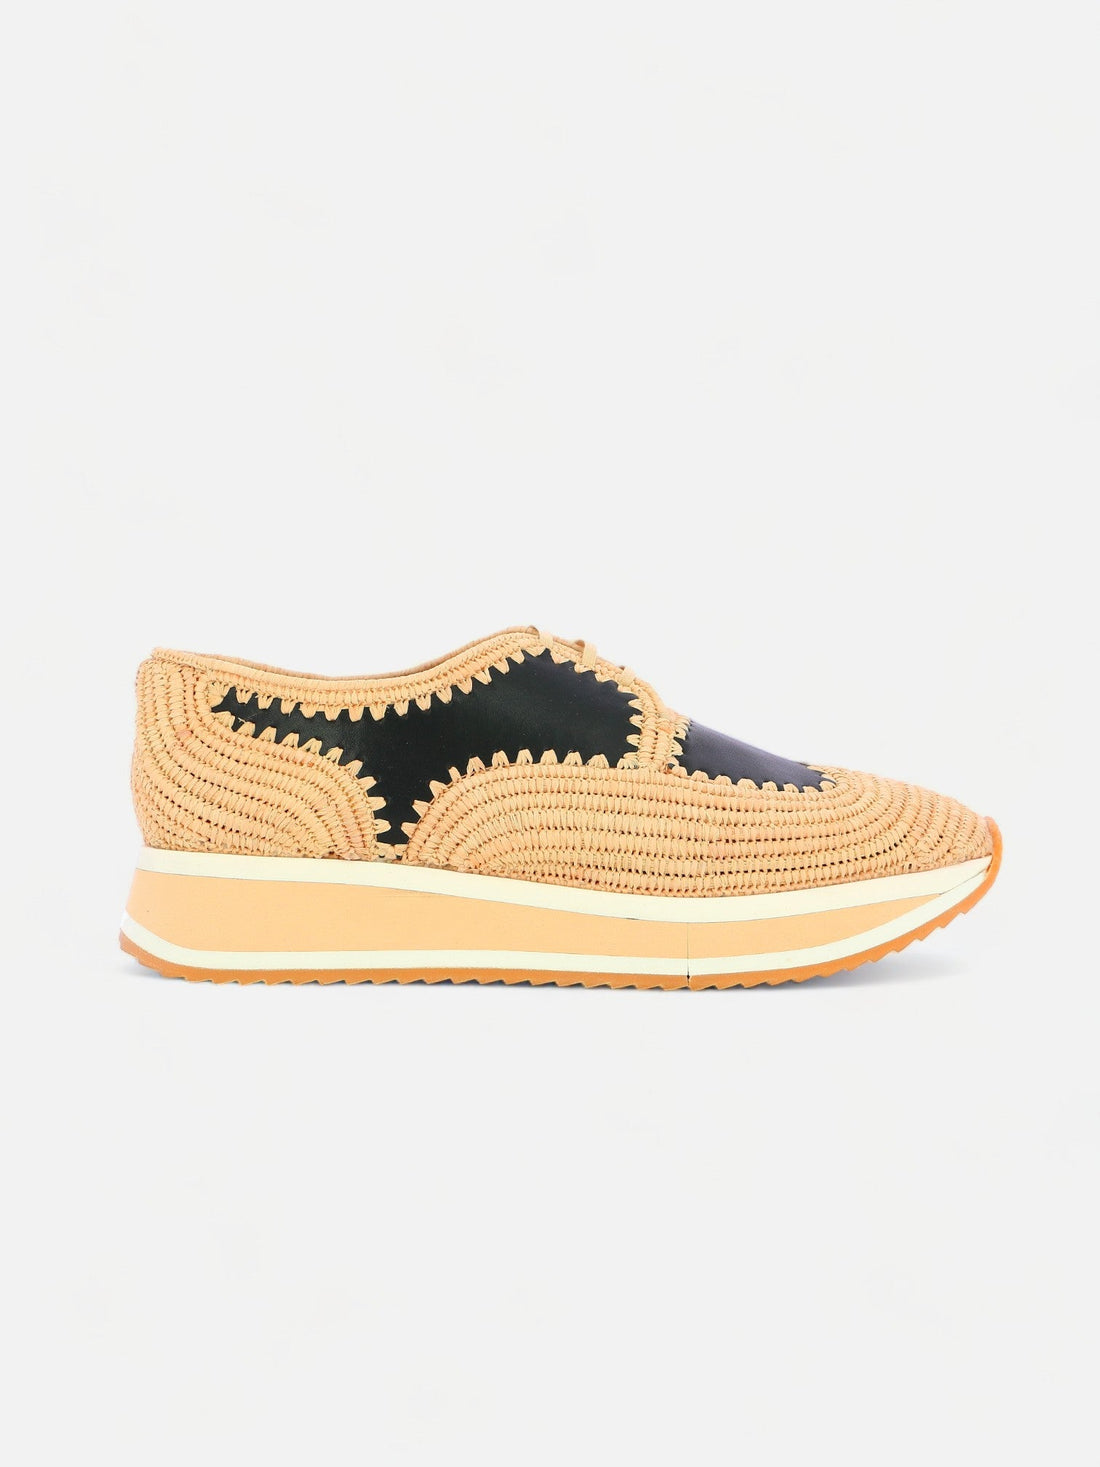 SNEAKERS - ONEIL sneakers, calfskin black and straw - 3606063643047 - Clergerie Paris - Europe